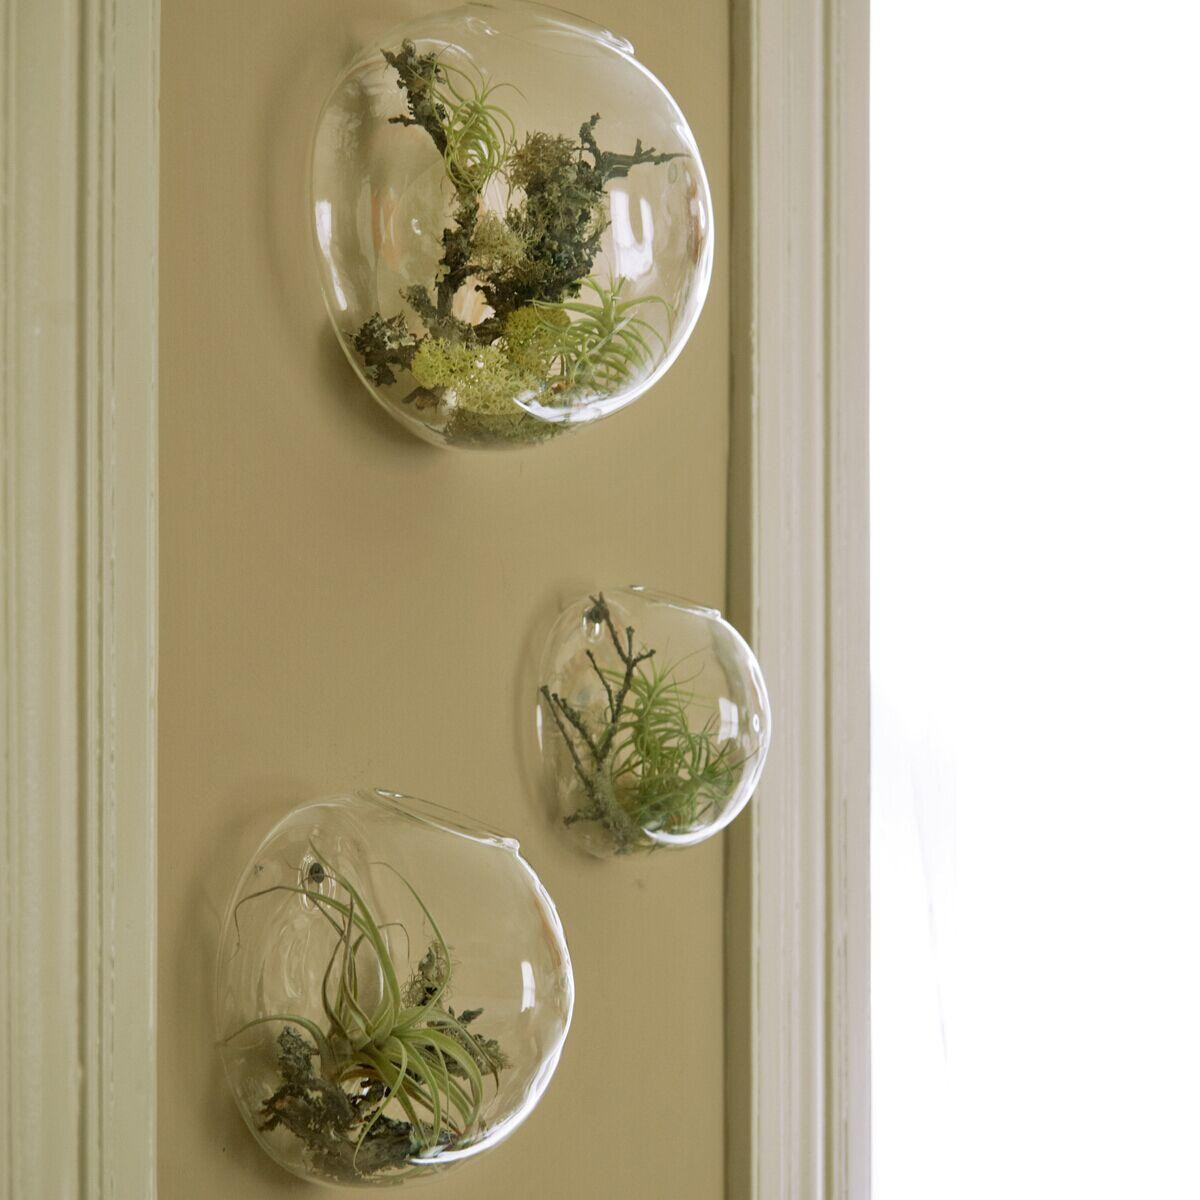 28 Awesome Large Round Clear Glass Vase 2023 free download large round clear glass vase of wall bubble terrariums glass wall vase for flowers indoor plants in wall bubble terrariums glass wall vase for flowers indoor plants wall mounted planter for 